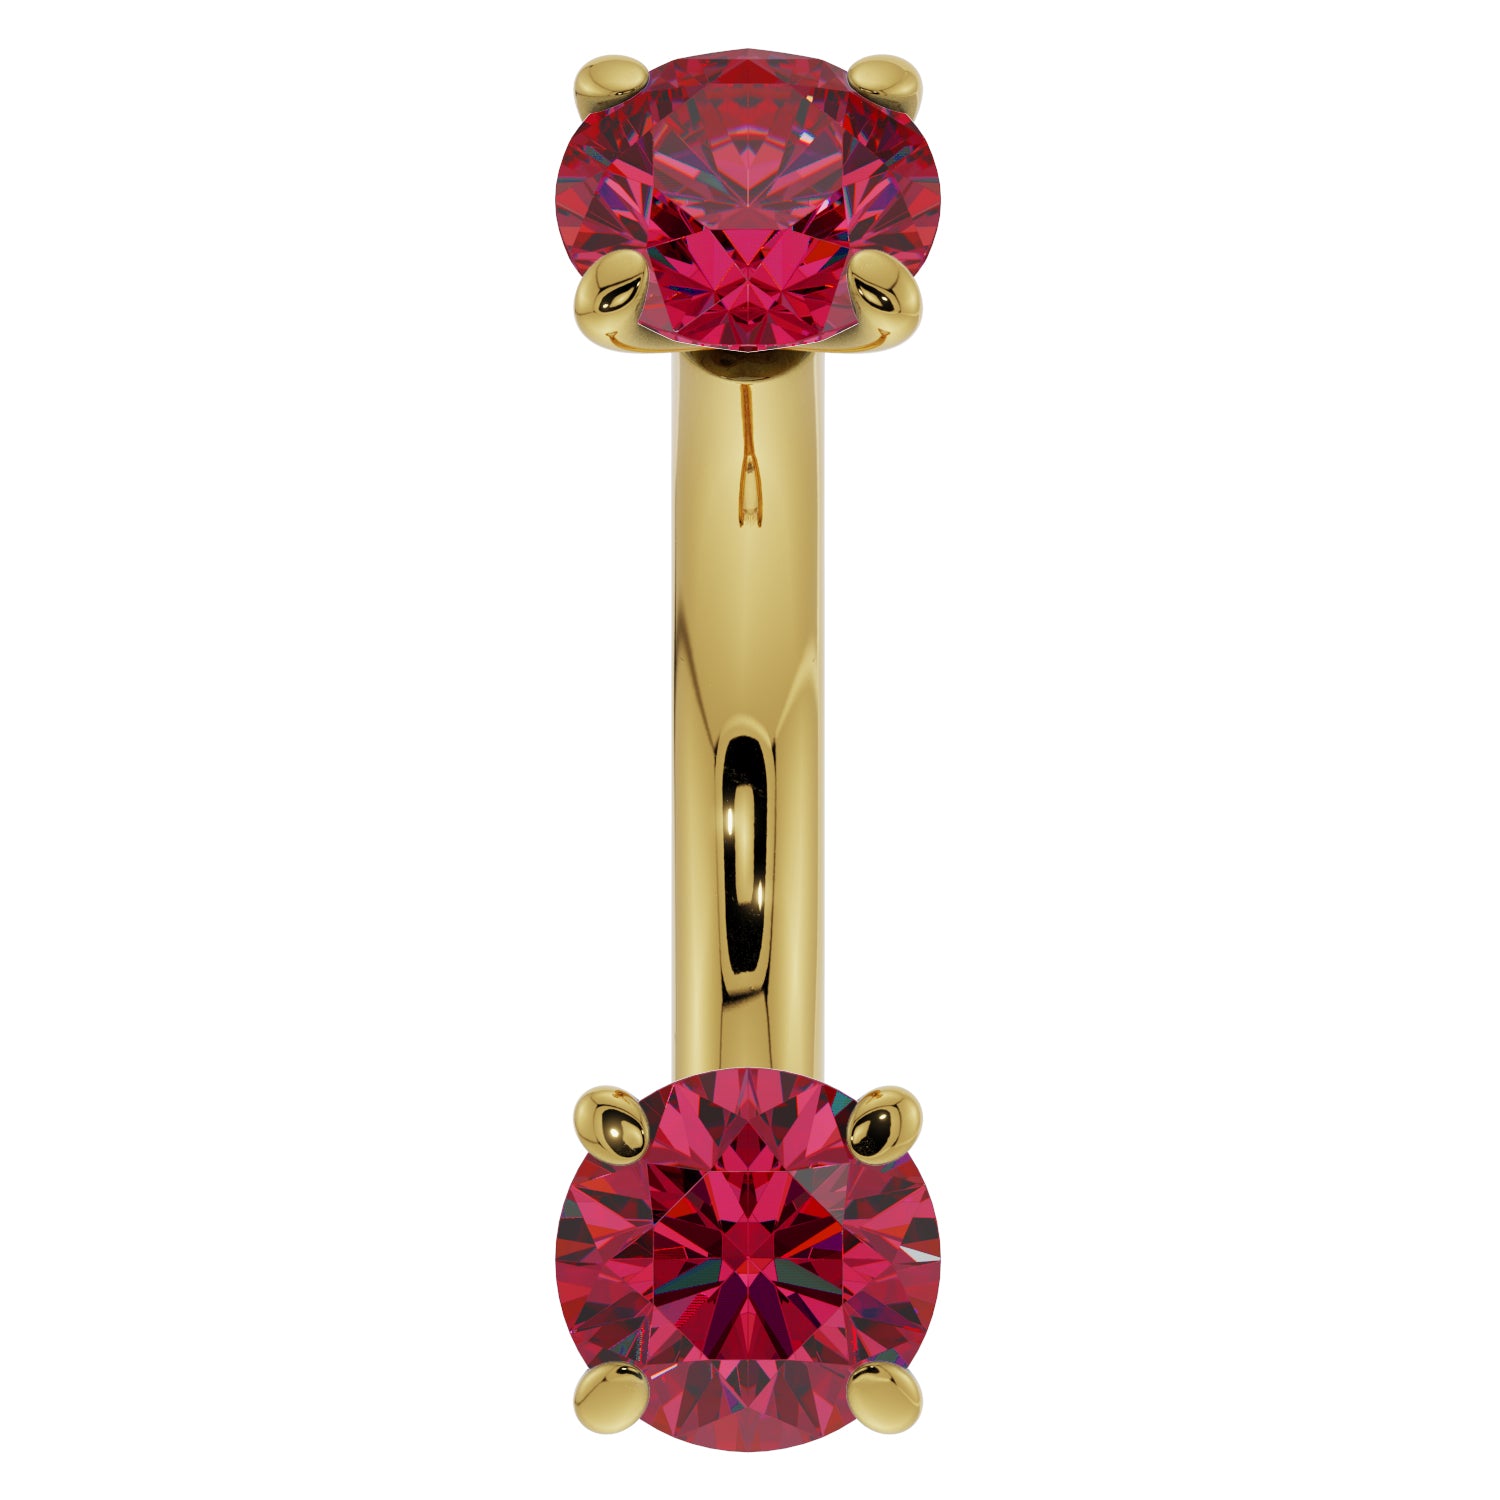 Ruby Prong-Set Eyebrow Rook Belly Curved Barbell-14K Yellow Gold   14G (1.6mm) (Belly Ring)   7 16